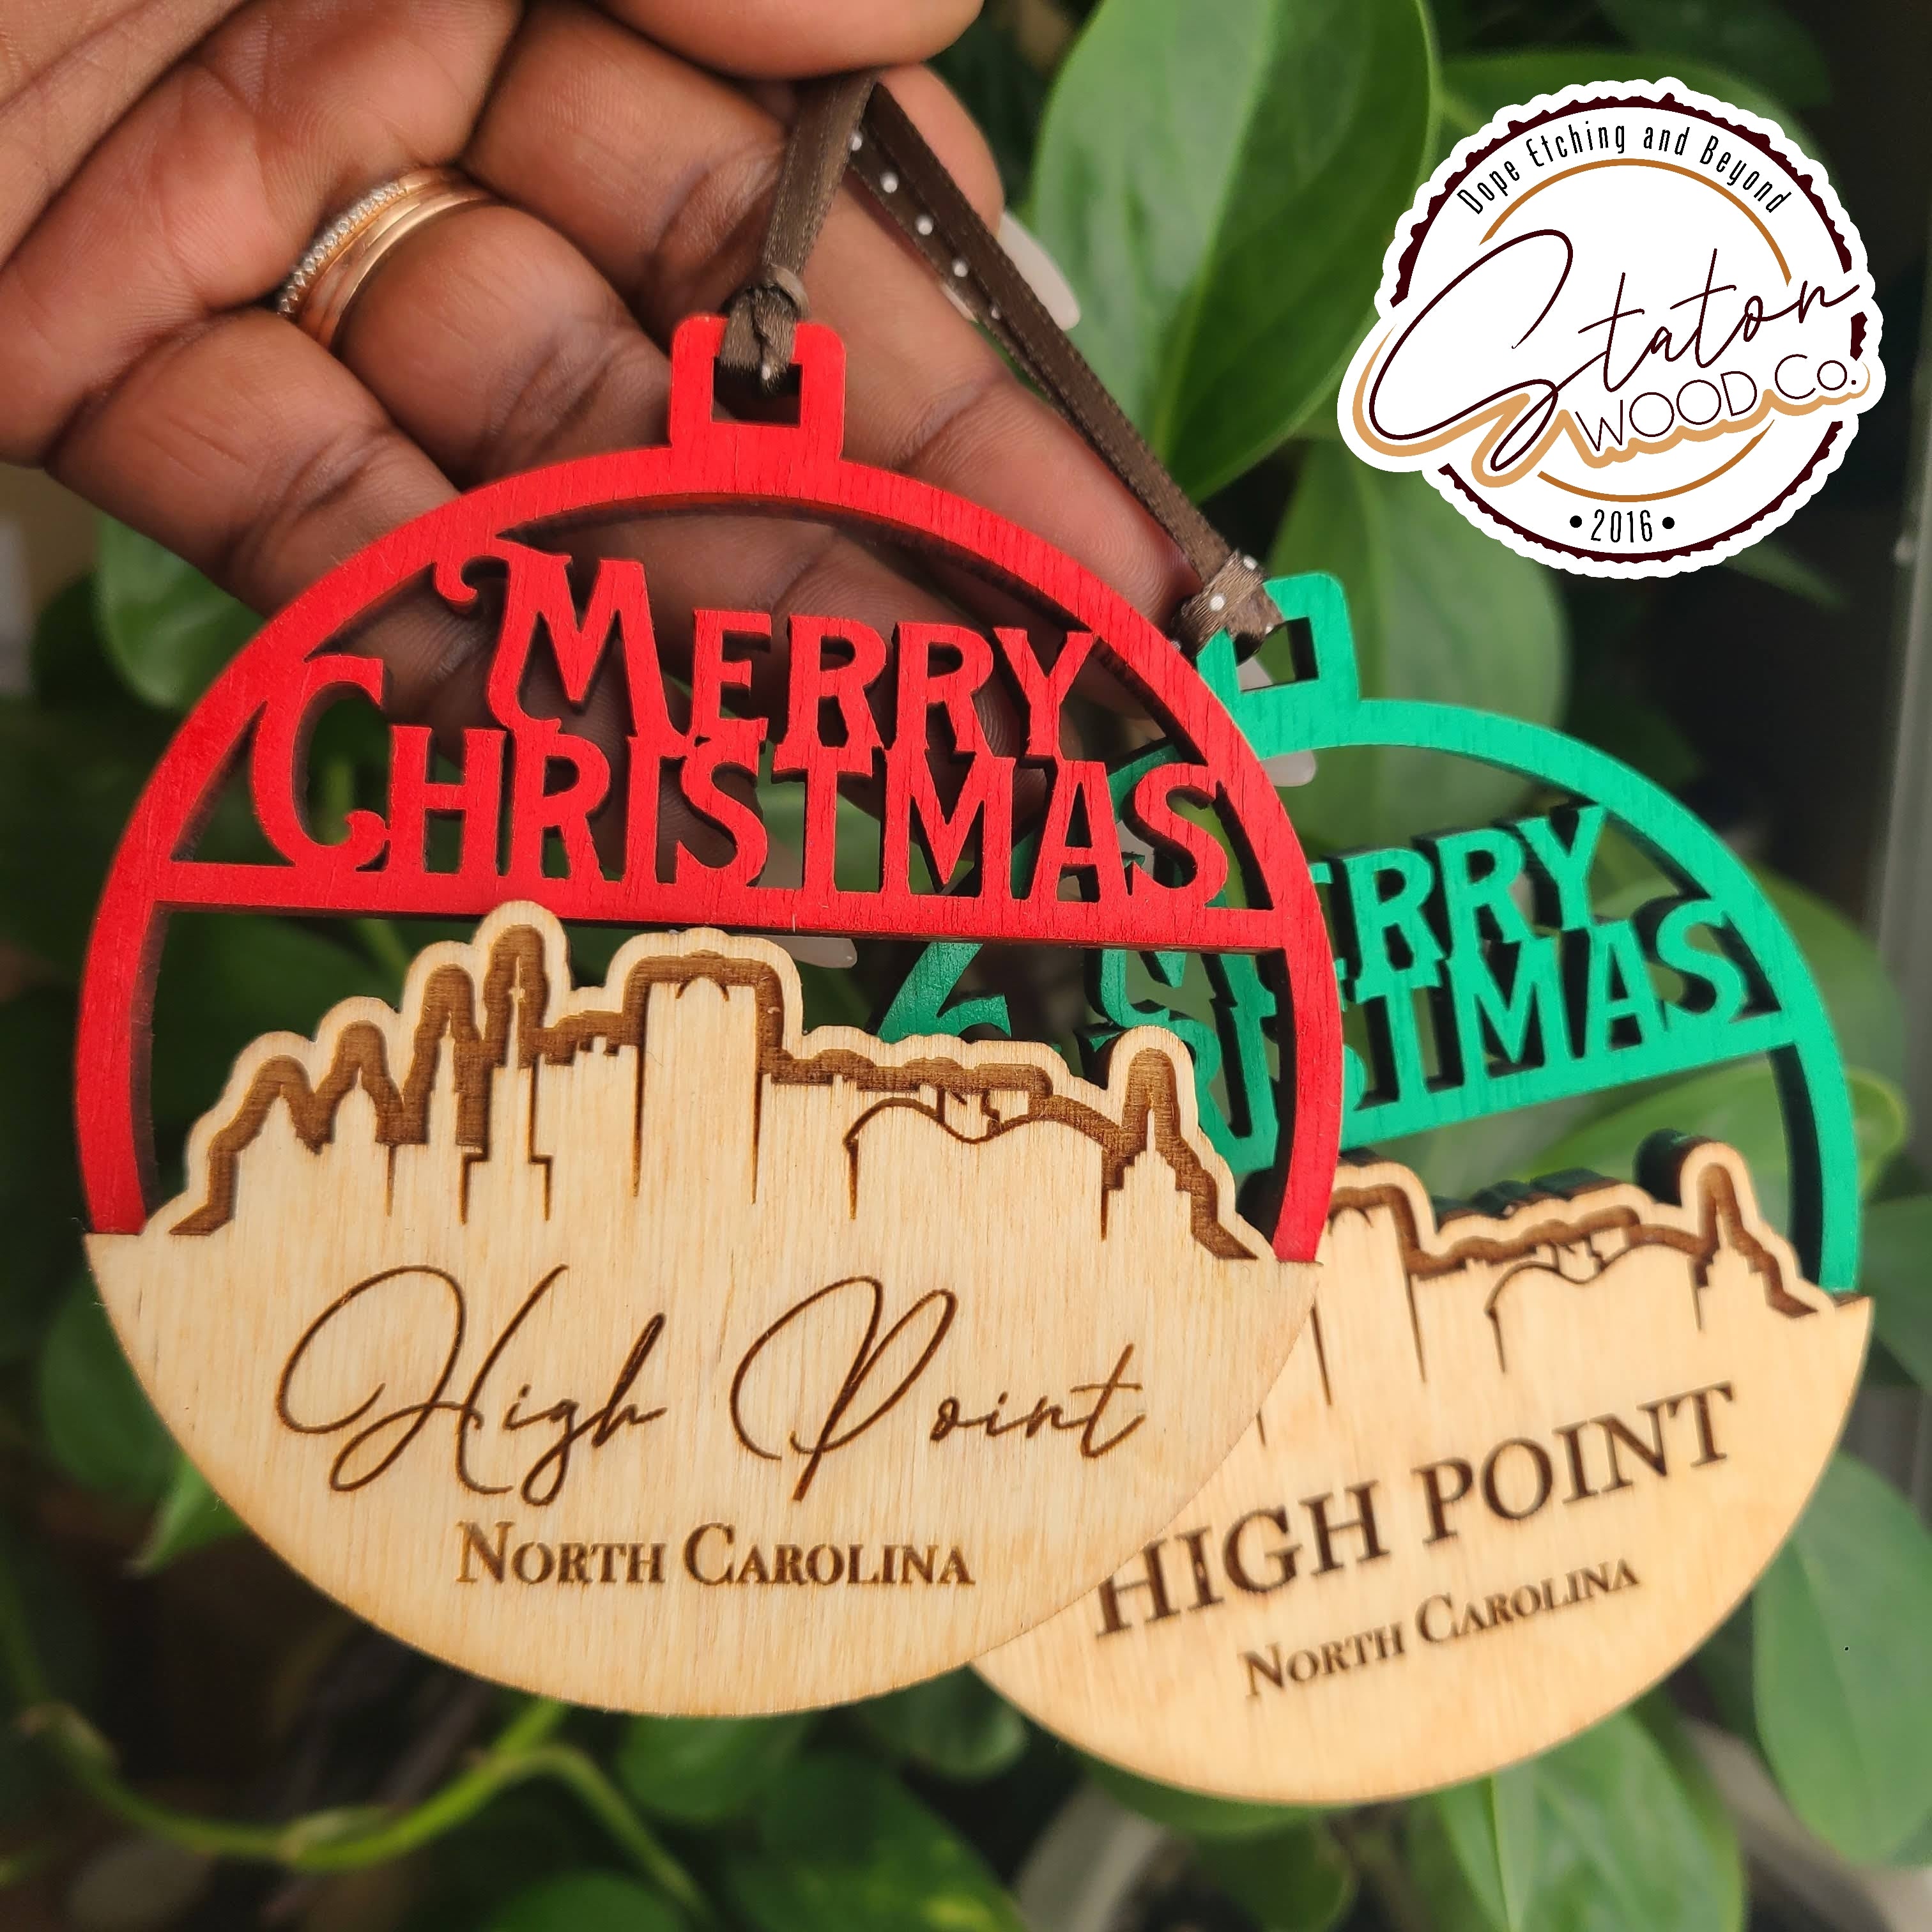 Merry City- High Point